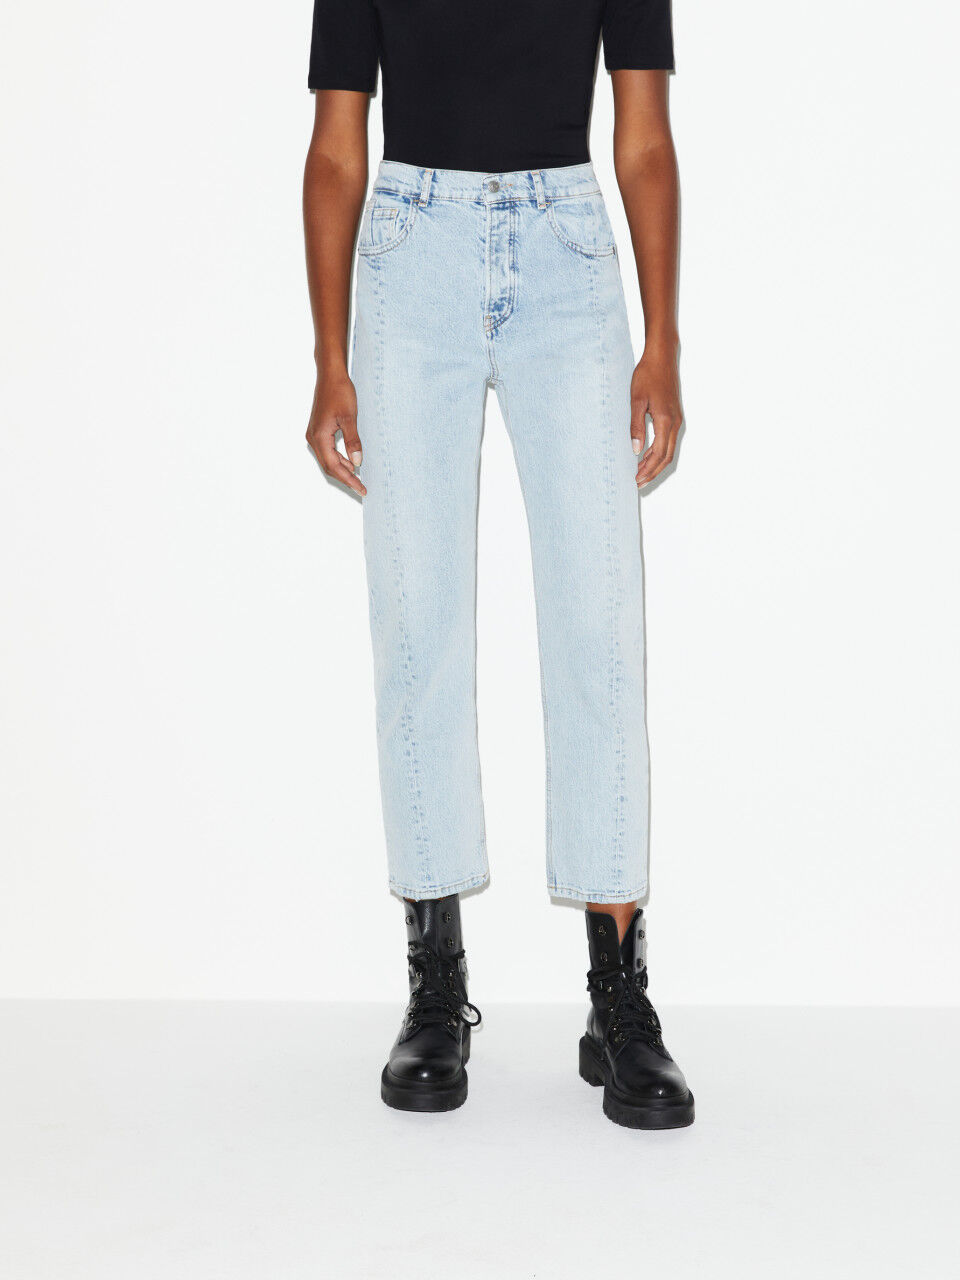 Slim cropped fit jeans